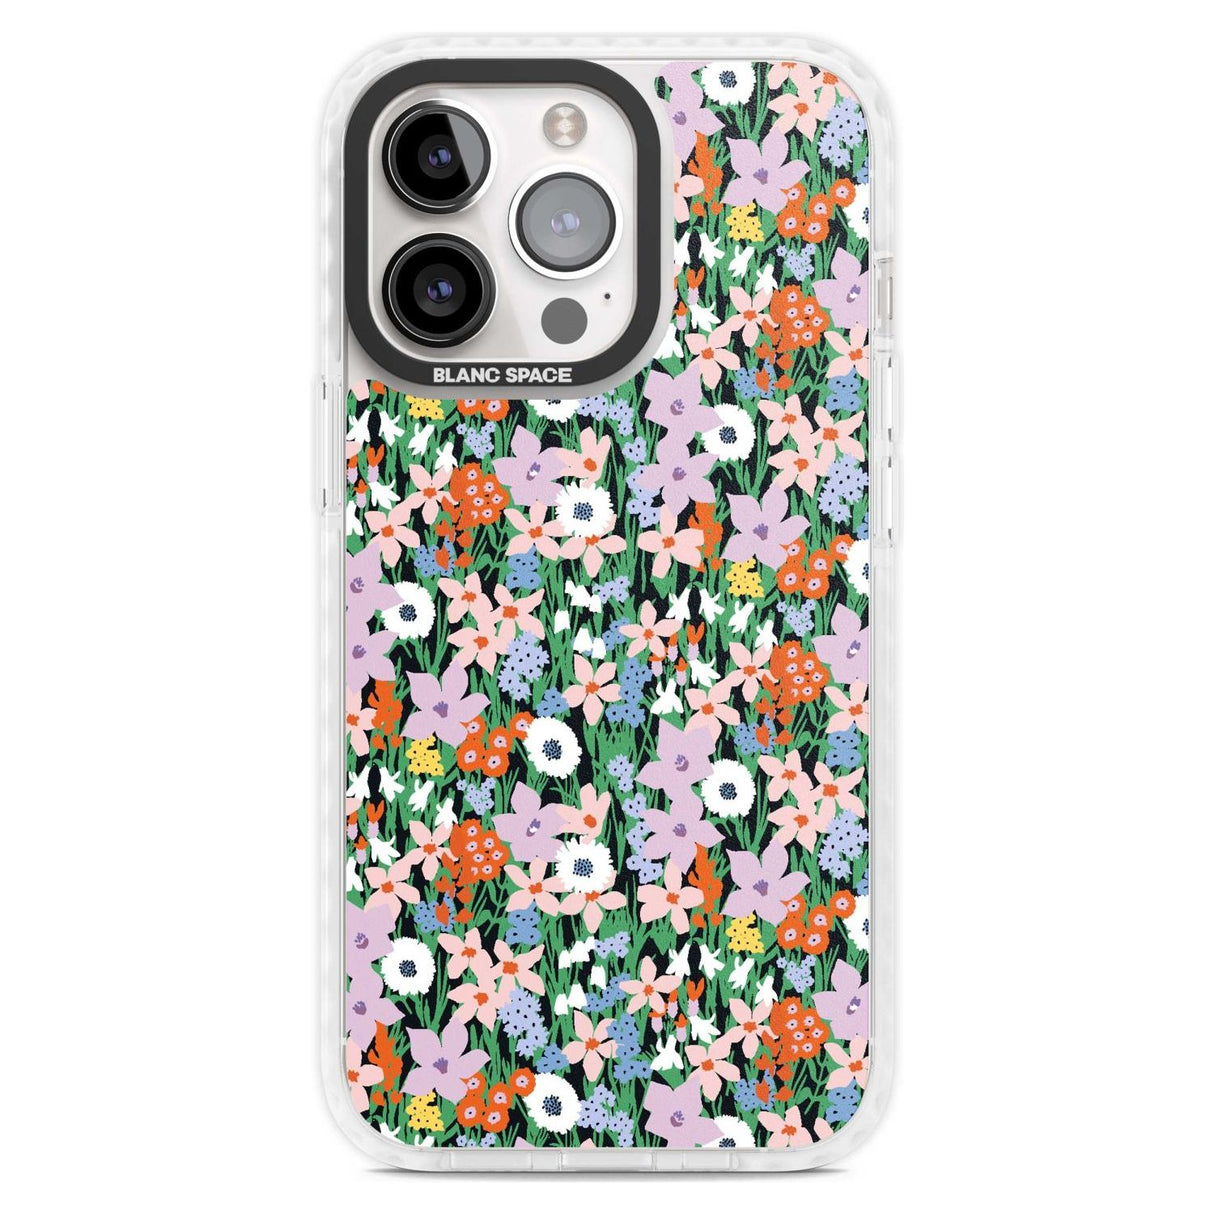 Jazzy Floral Mix: Solid Phone Case iPhone 15 Pro Max / Magsafe Impact Case,iPhone 15 Pro / Magsafe Impact Case Blanc Space